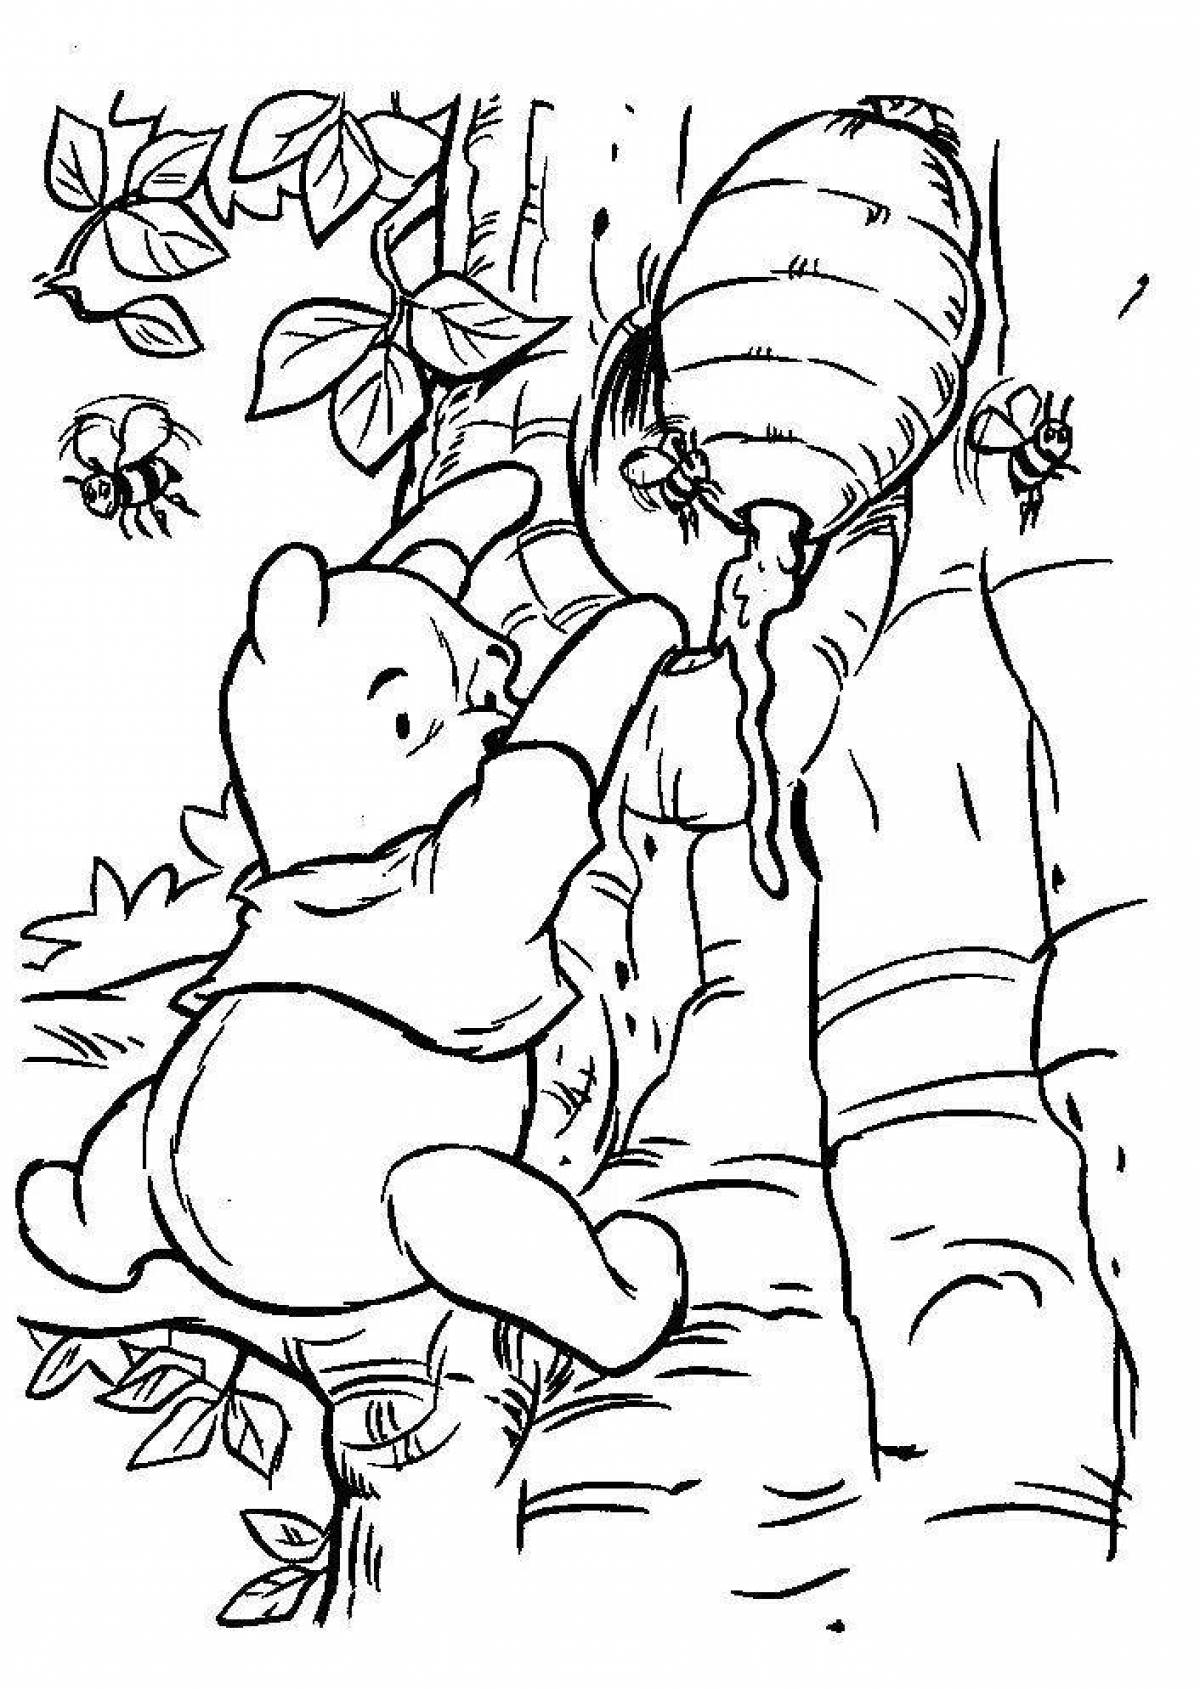 Exciting winnie the pooh game